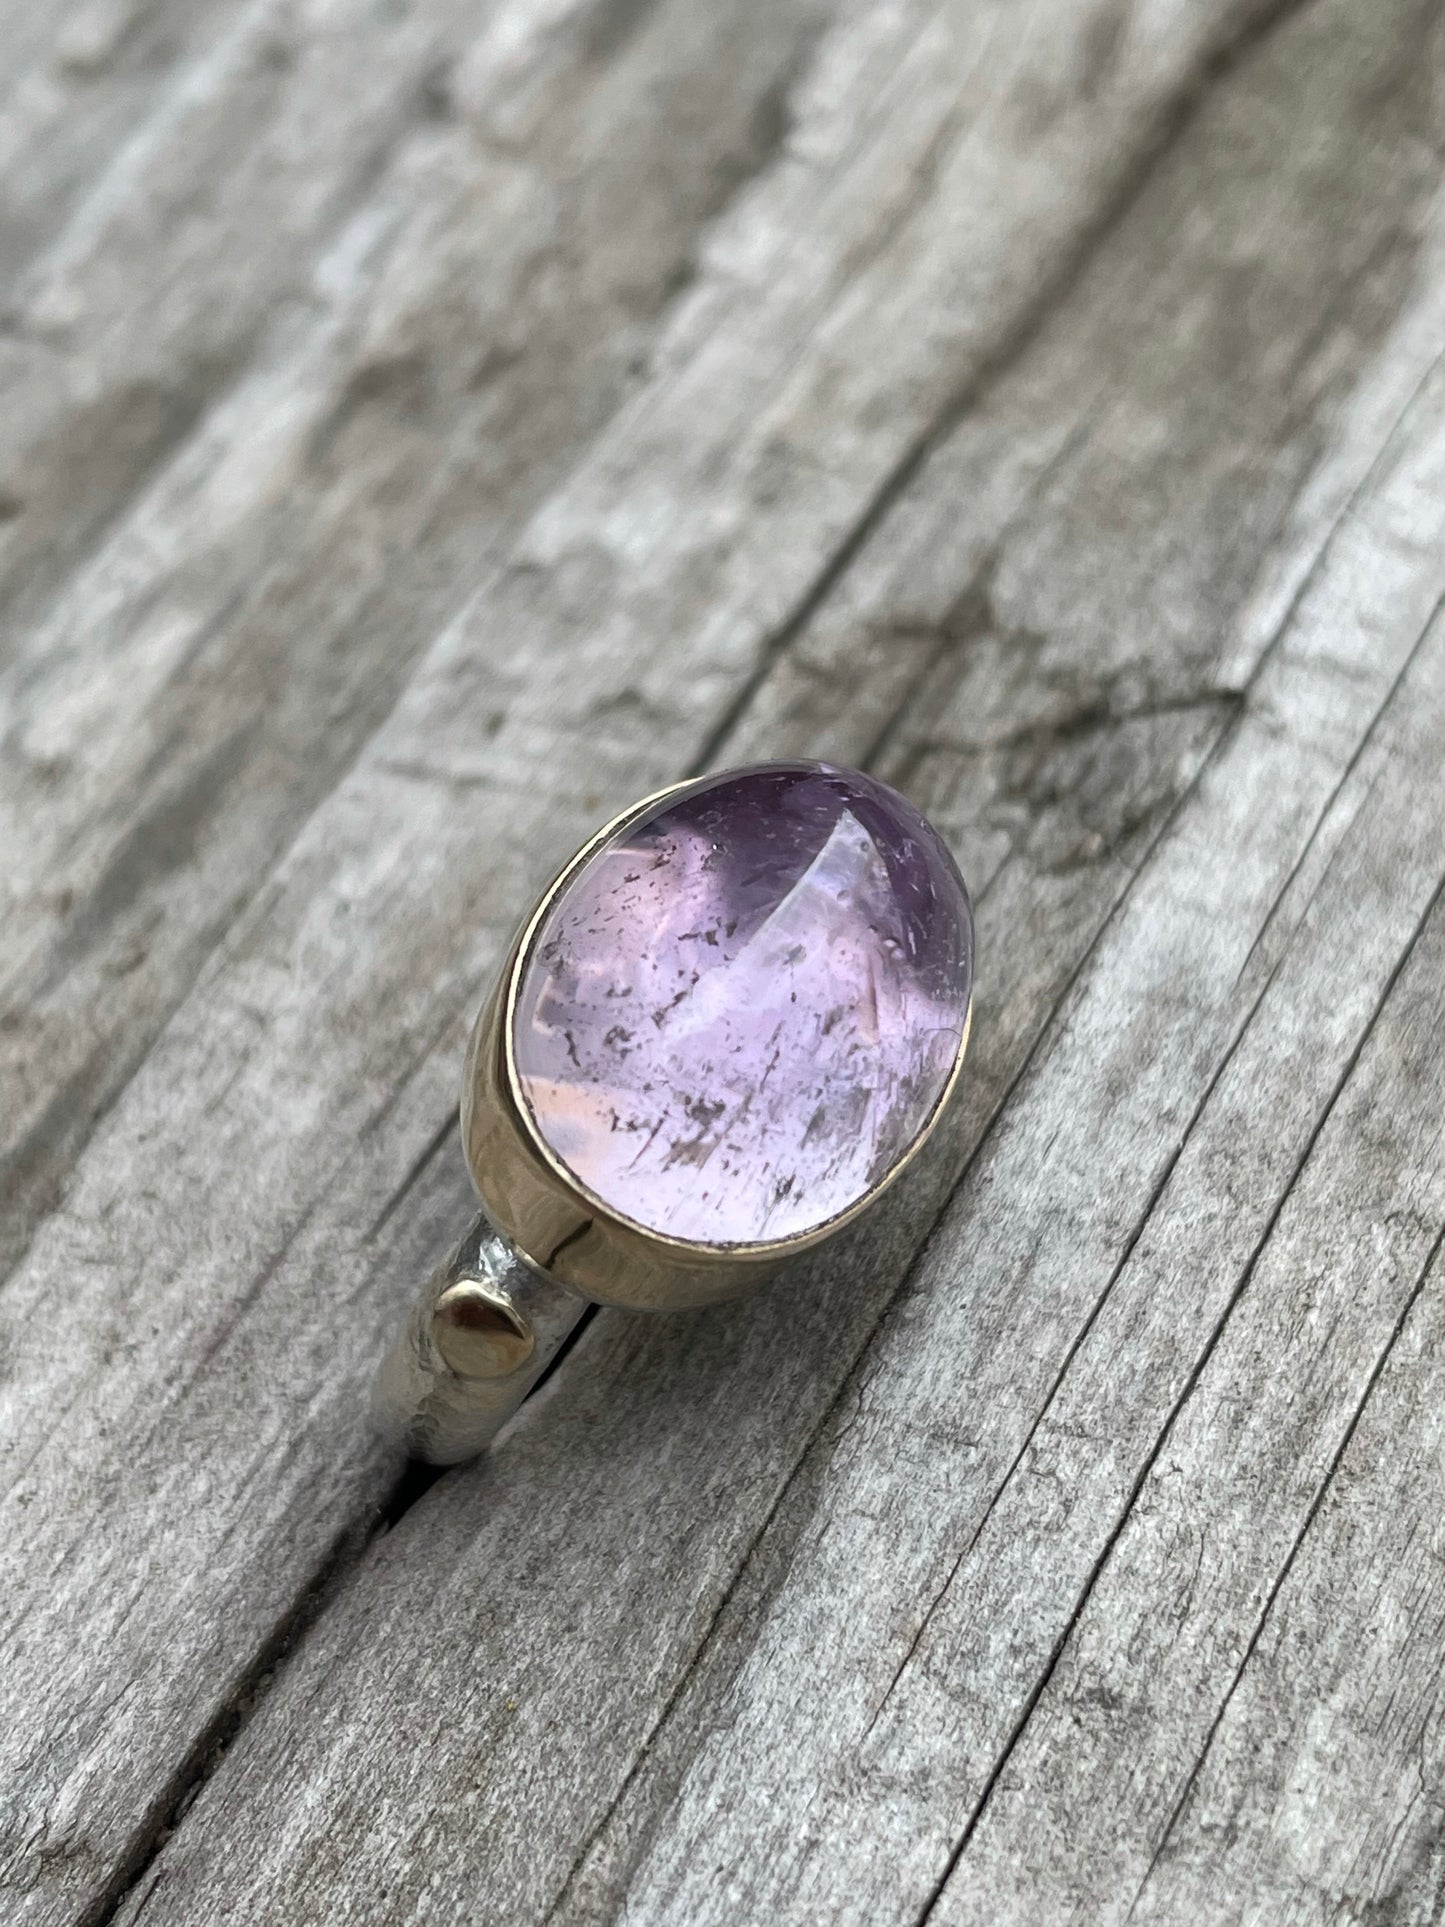 a large purple domes ring with a gold band around it and gold round accent on a silver band sits in some grey wood.